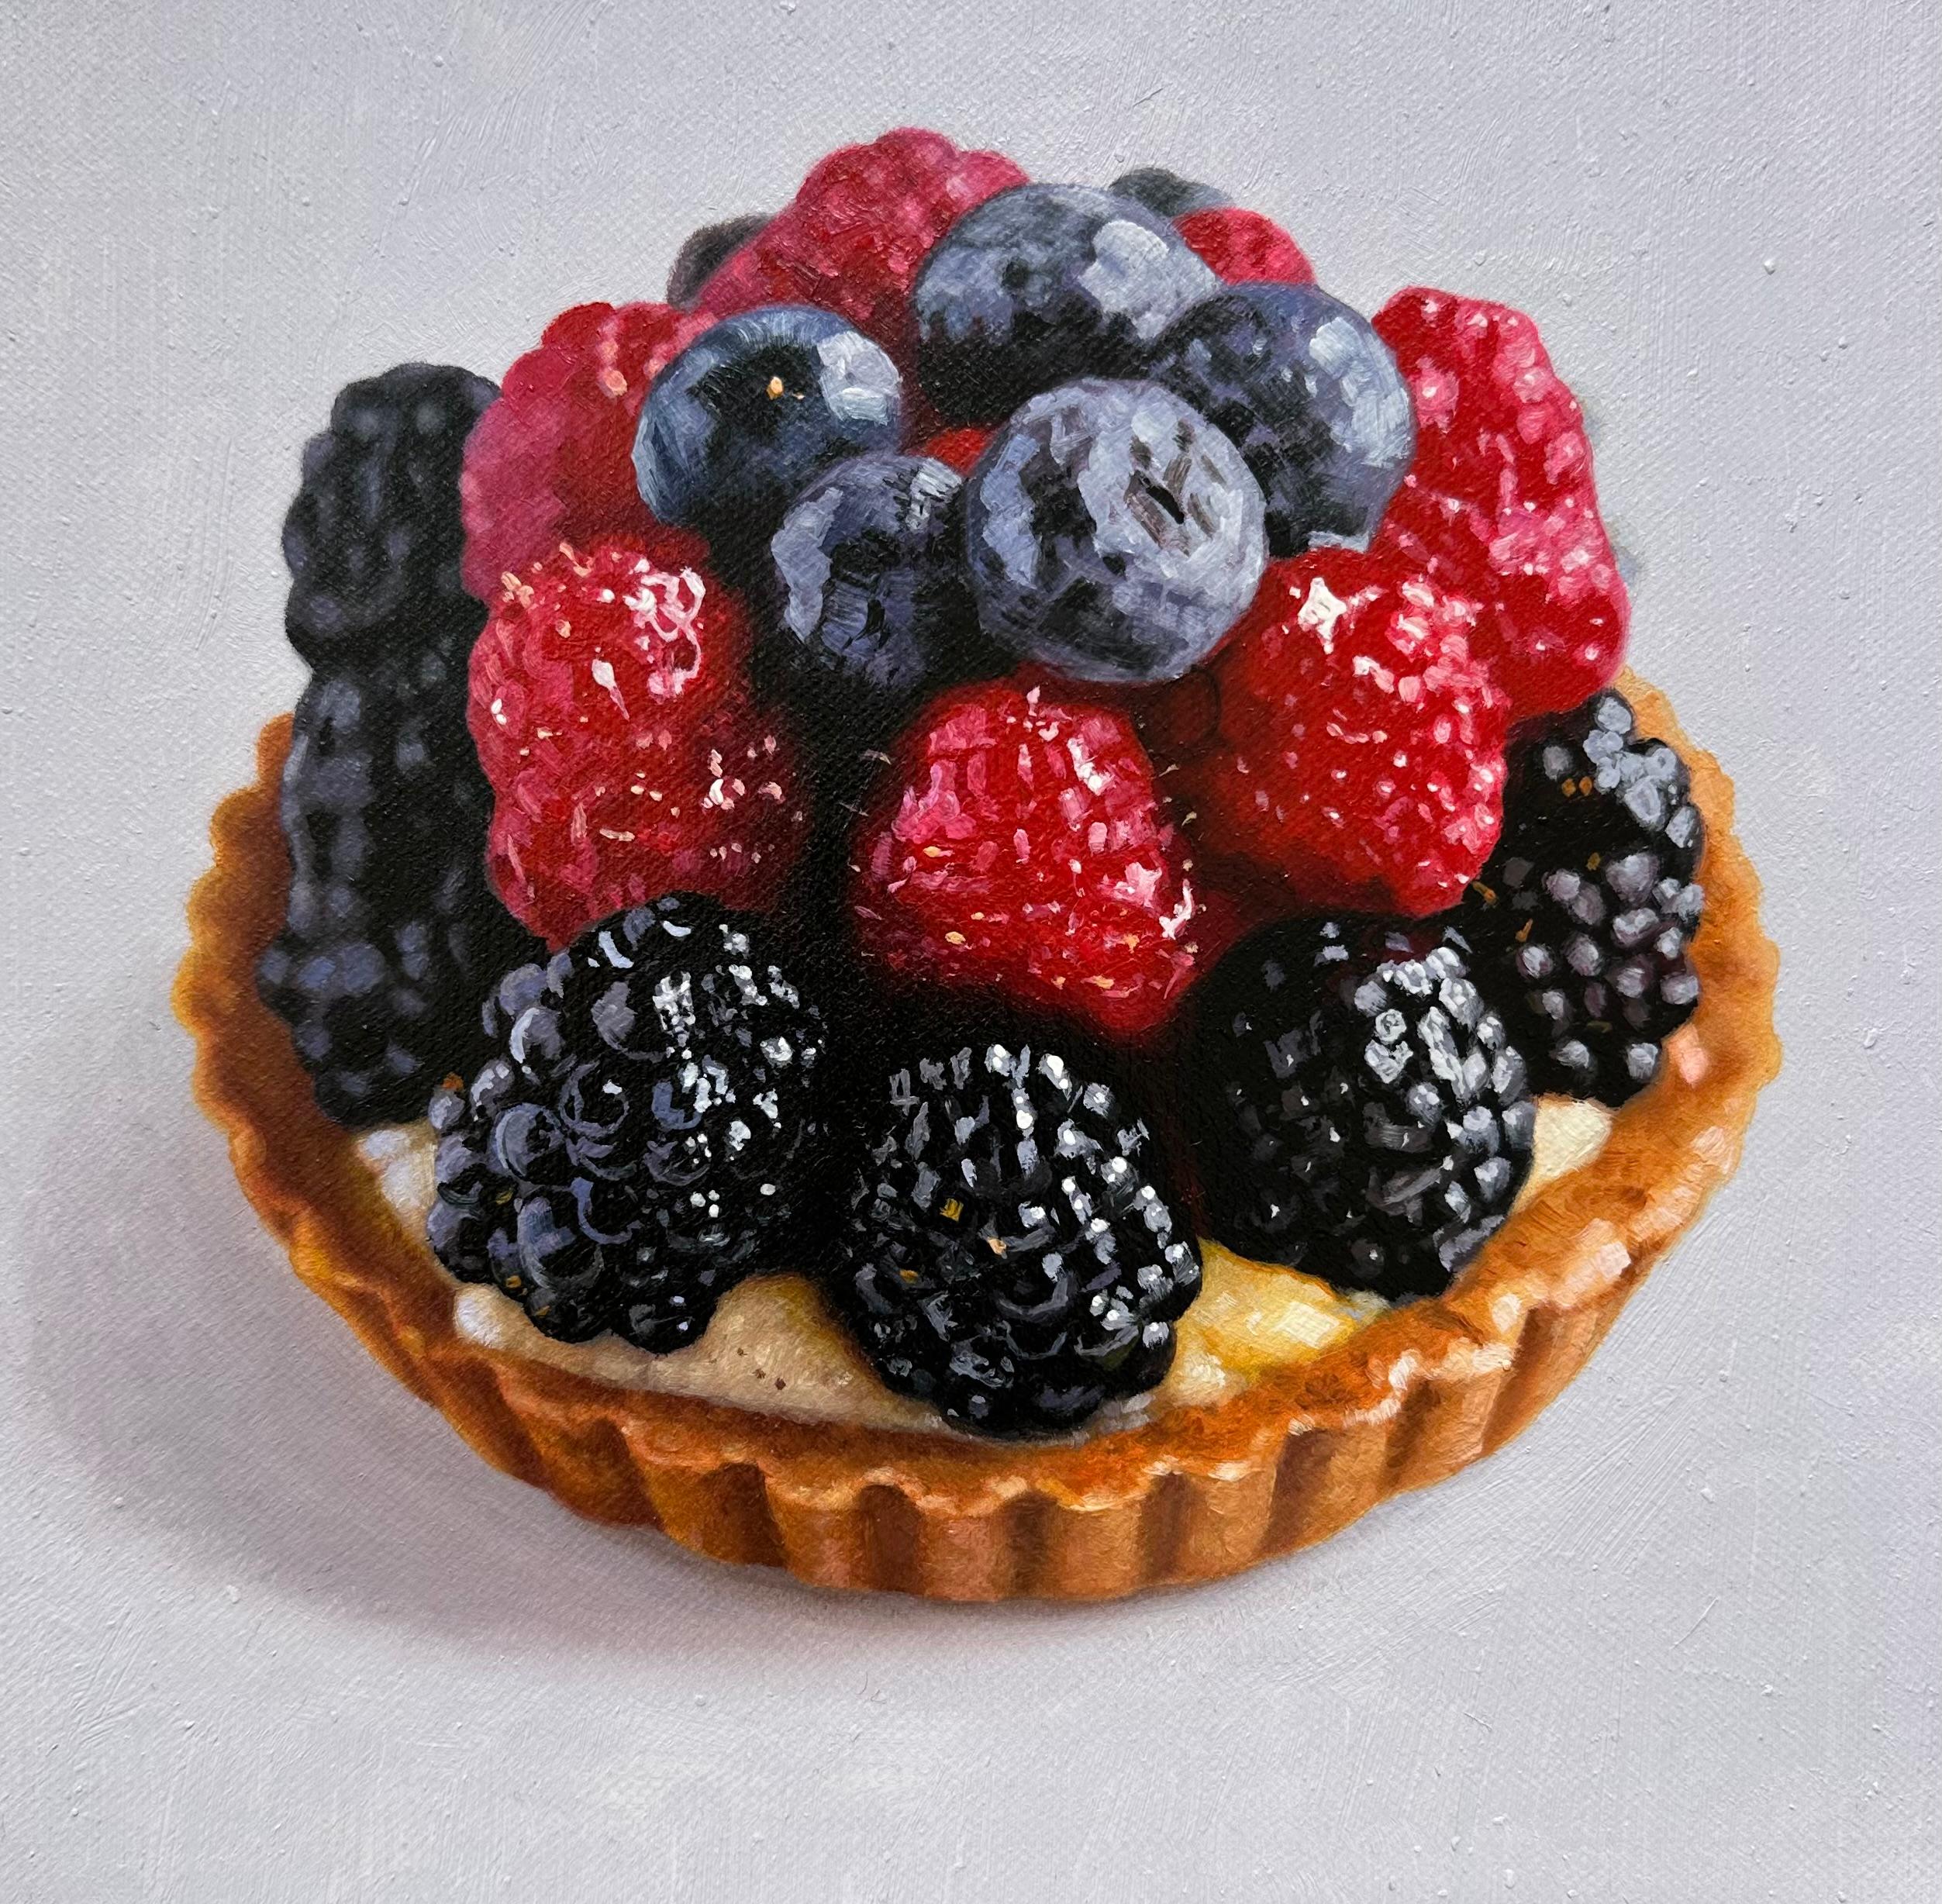 Marc Dennis Still-Life Painting - Blackberry, Raspberry, and Blueberry Tart with Hair